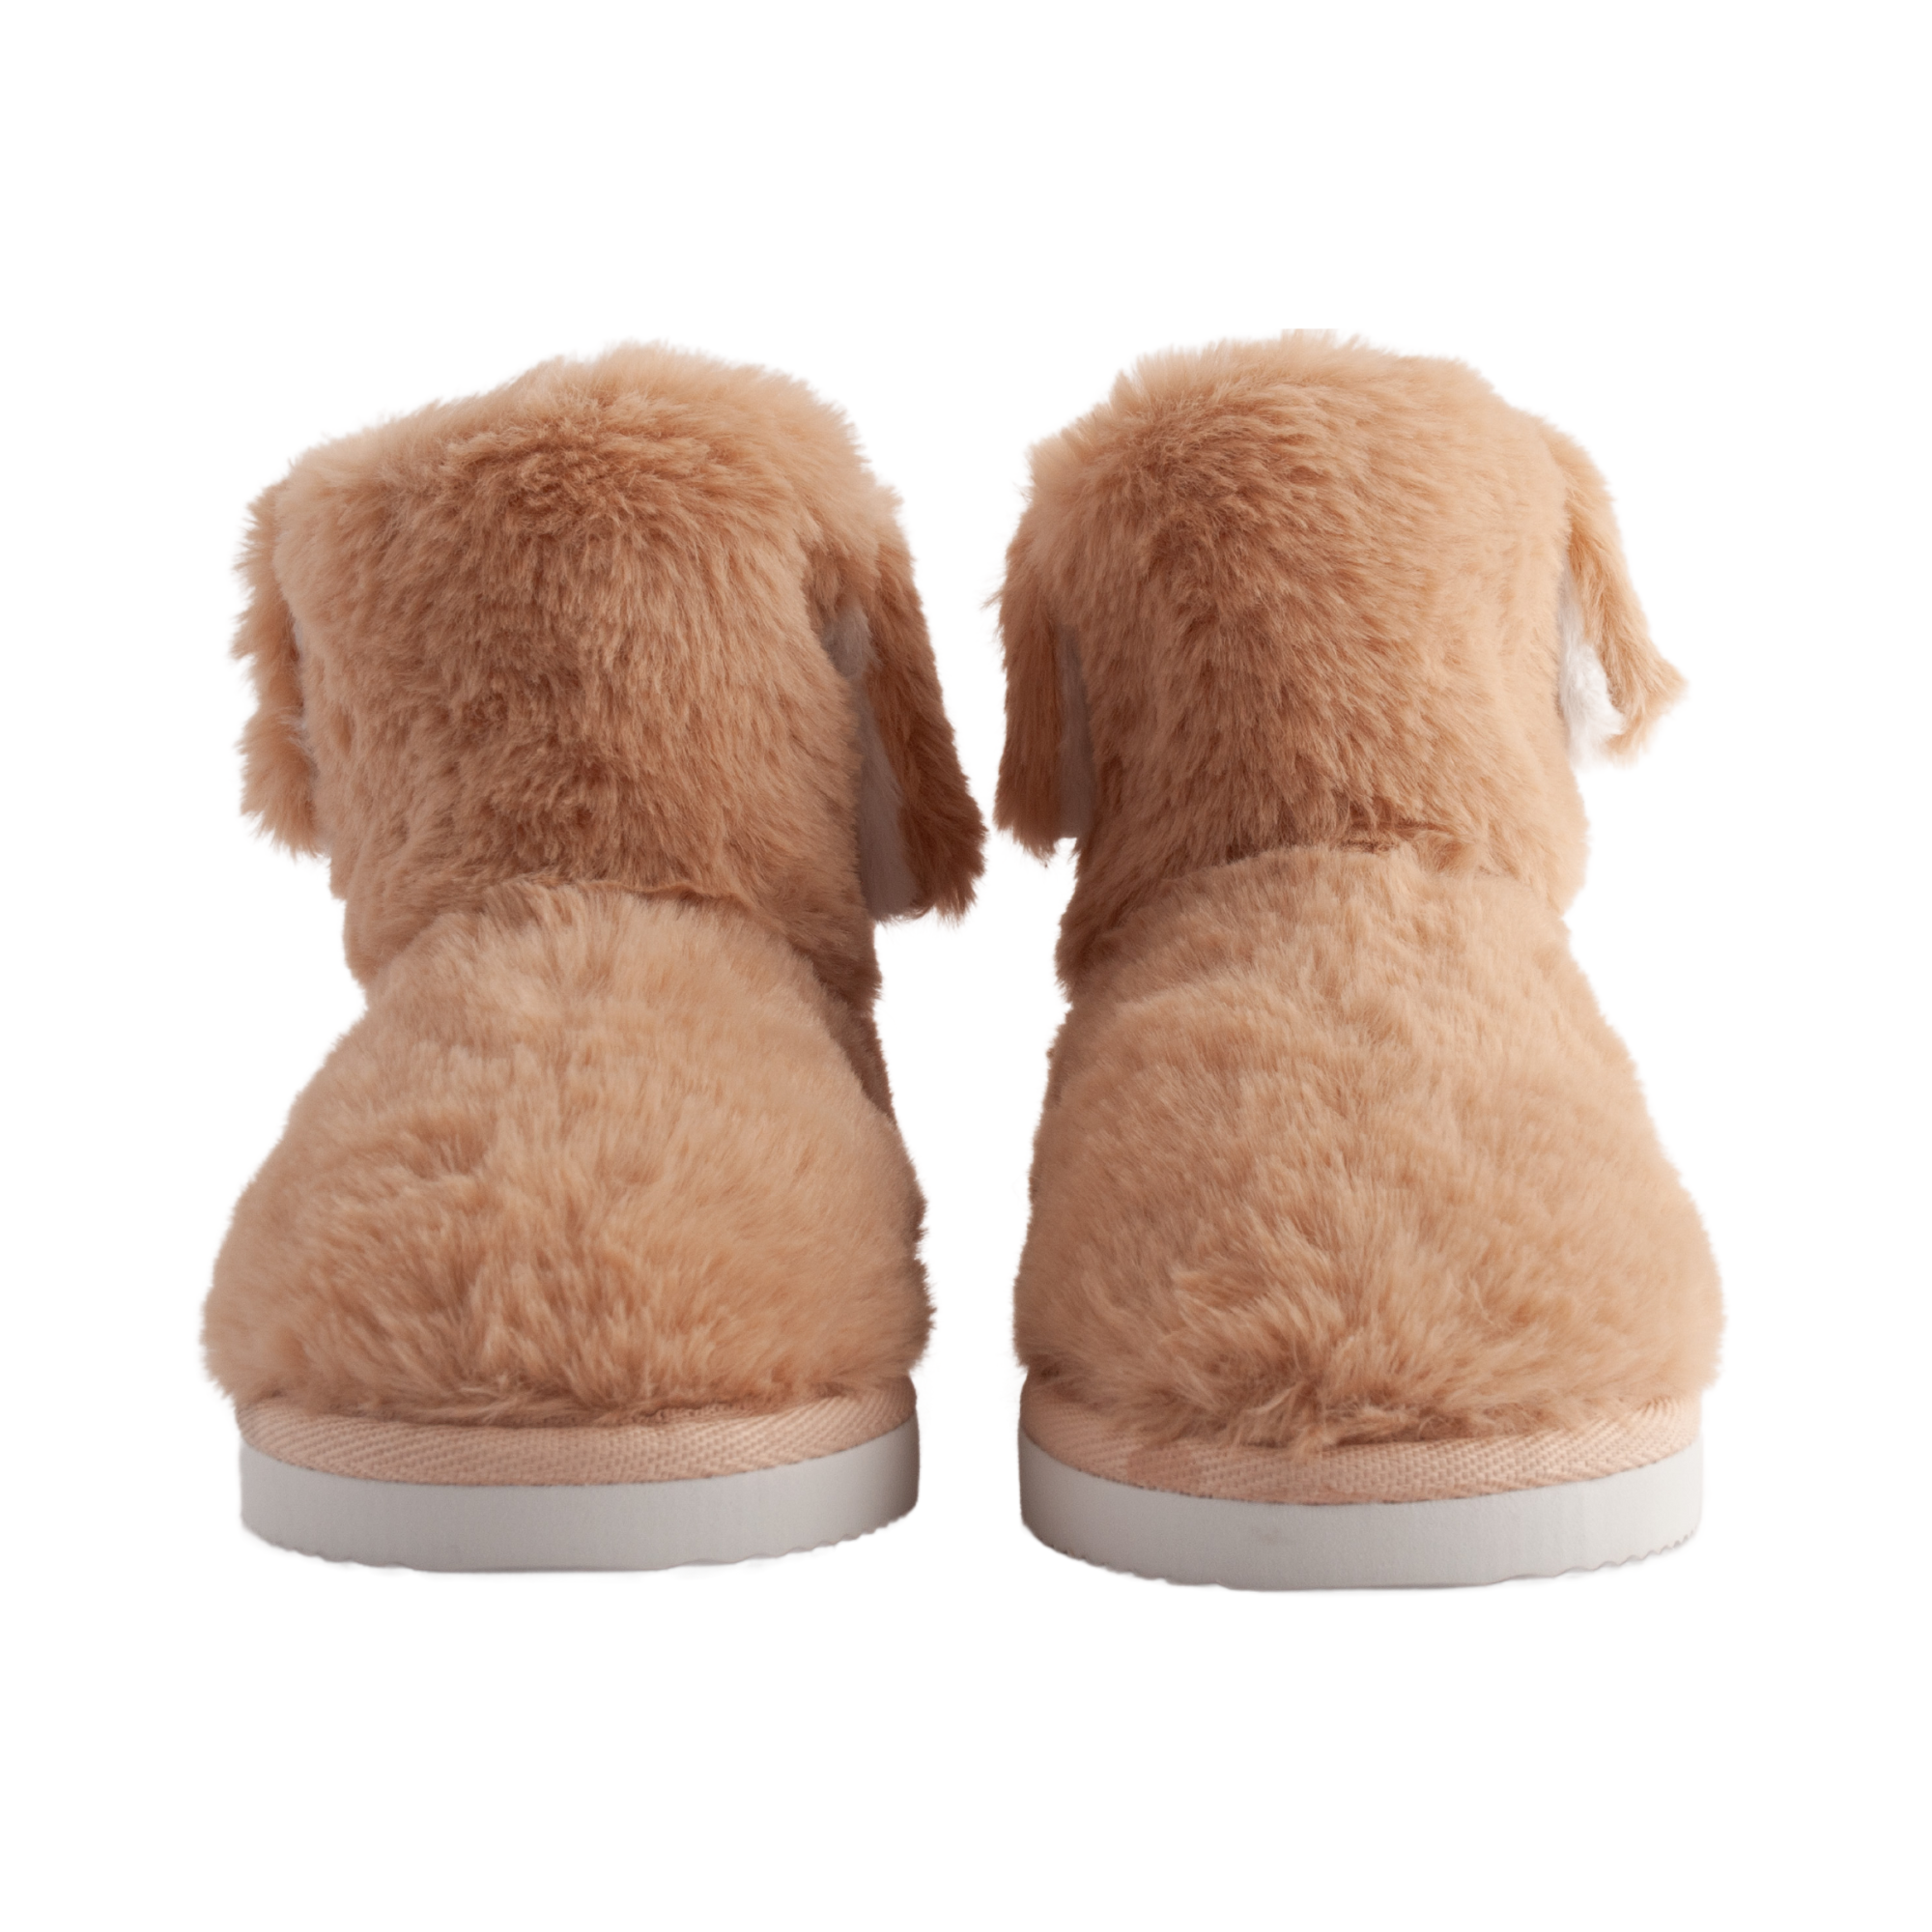 Novelty Slipper Boot - Brown Bunny Size 5-6